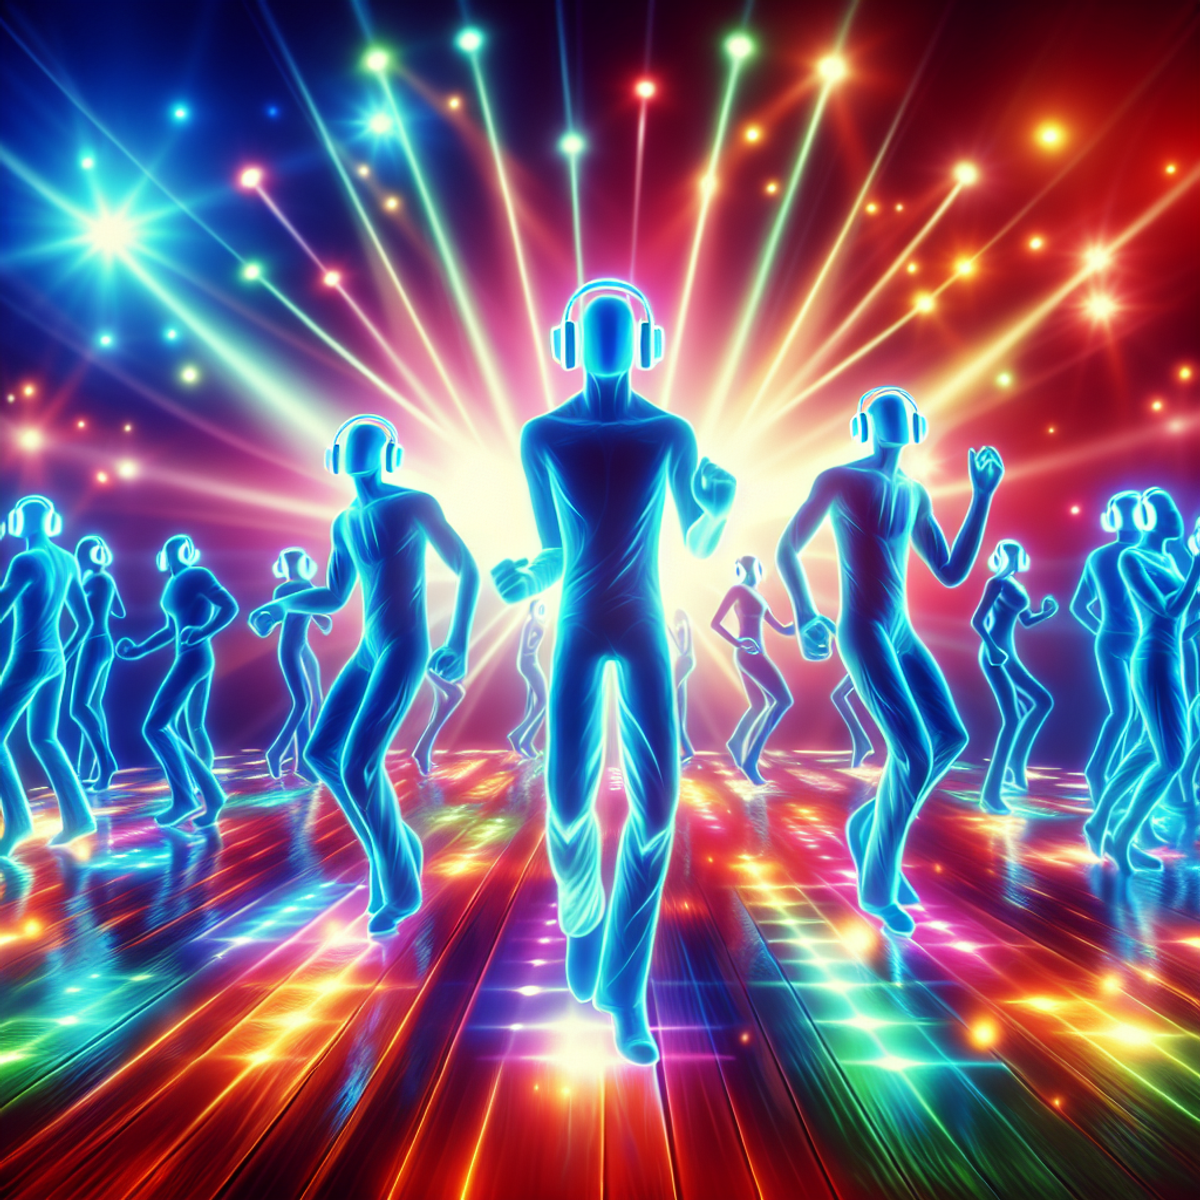 Alt text: A colorful and vibrant image of people dancing at a silent disco, wearing headphones and surrounded by glowing neon lights.